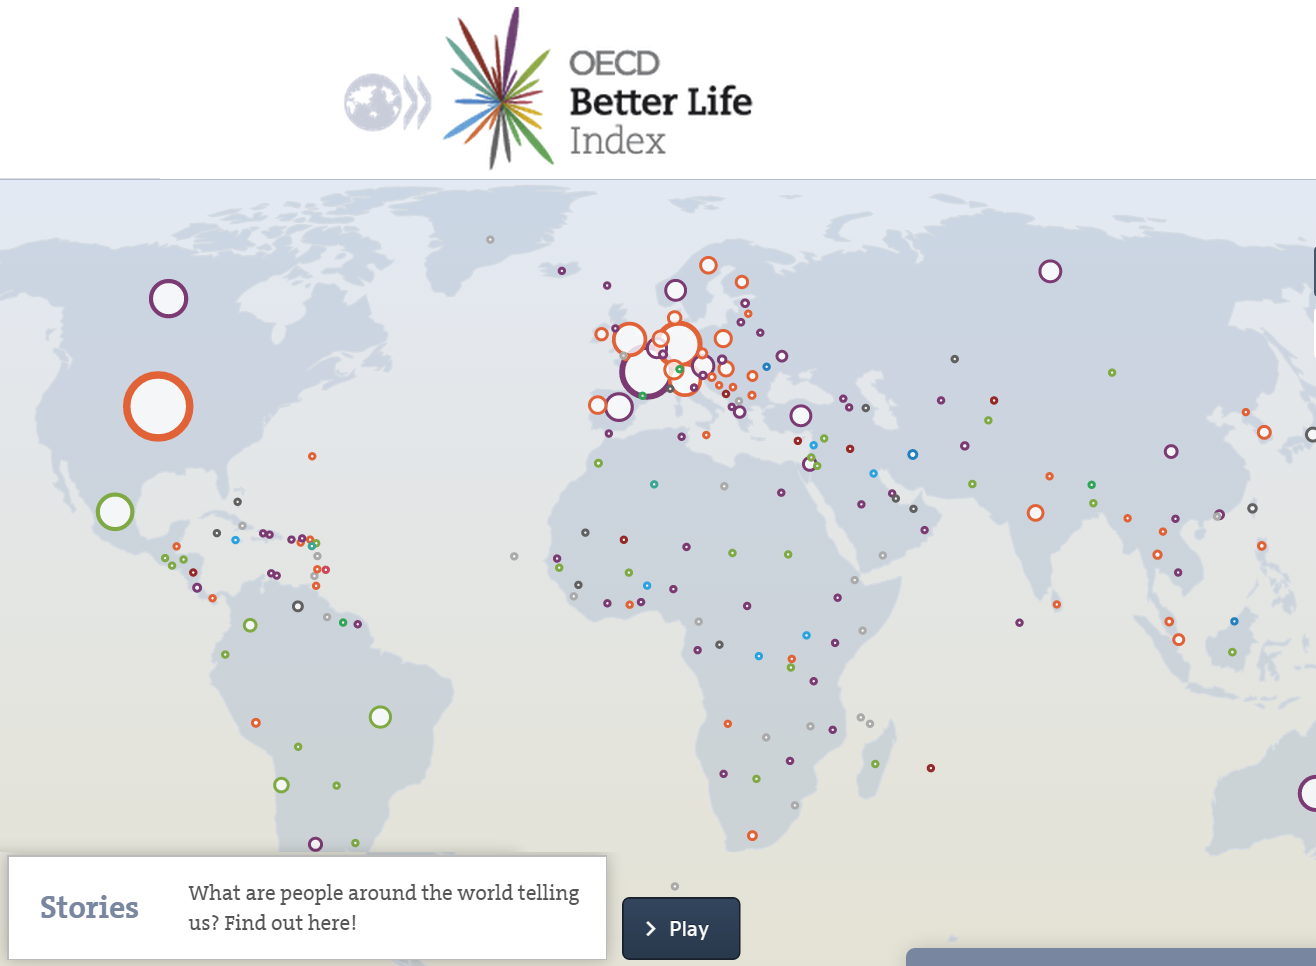 Better Life Initiative Index, OECD